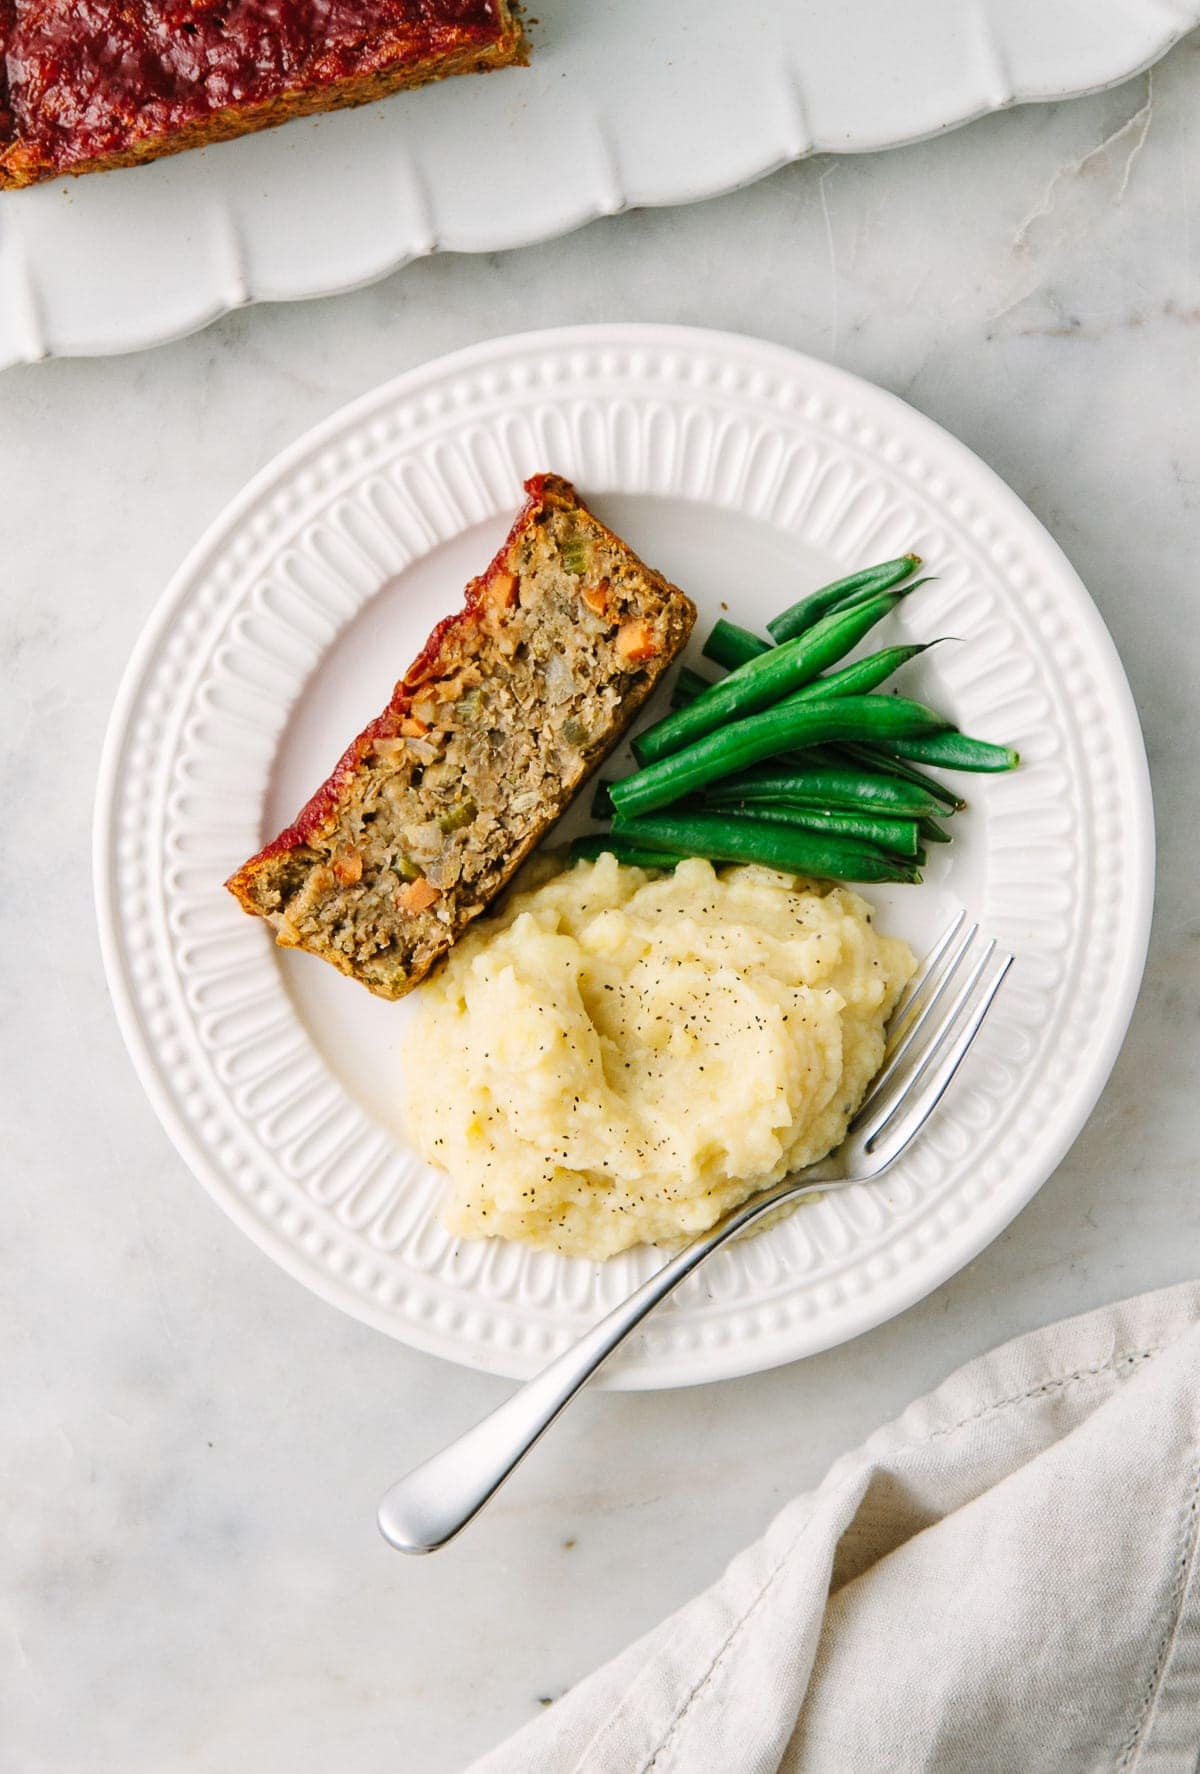 top down view of a serving of vegan lentil loaf with apple, sage and fennel on a white plate with items.